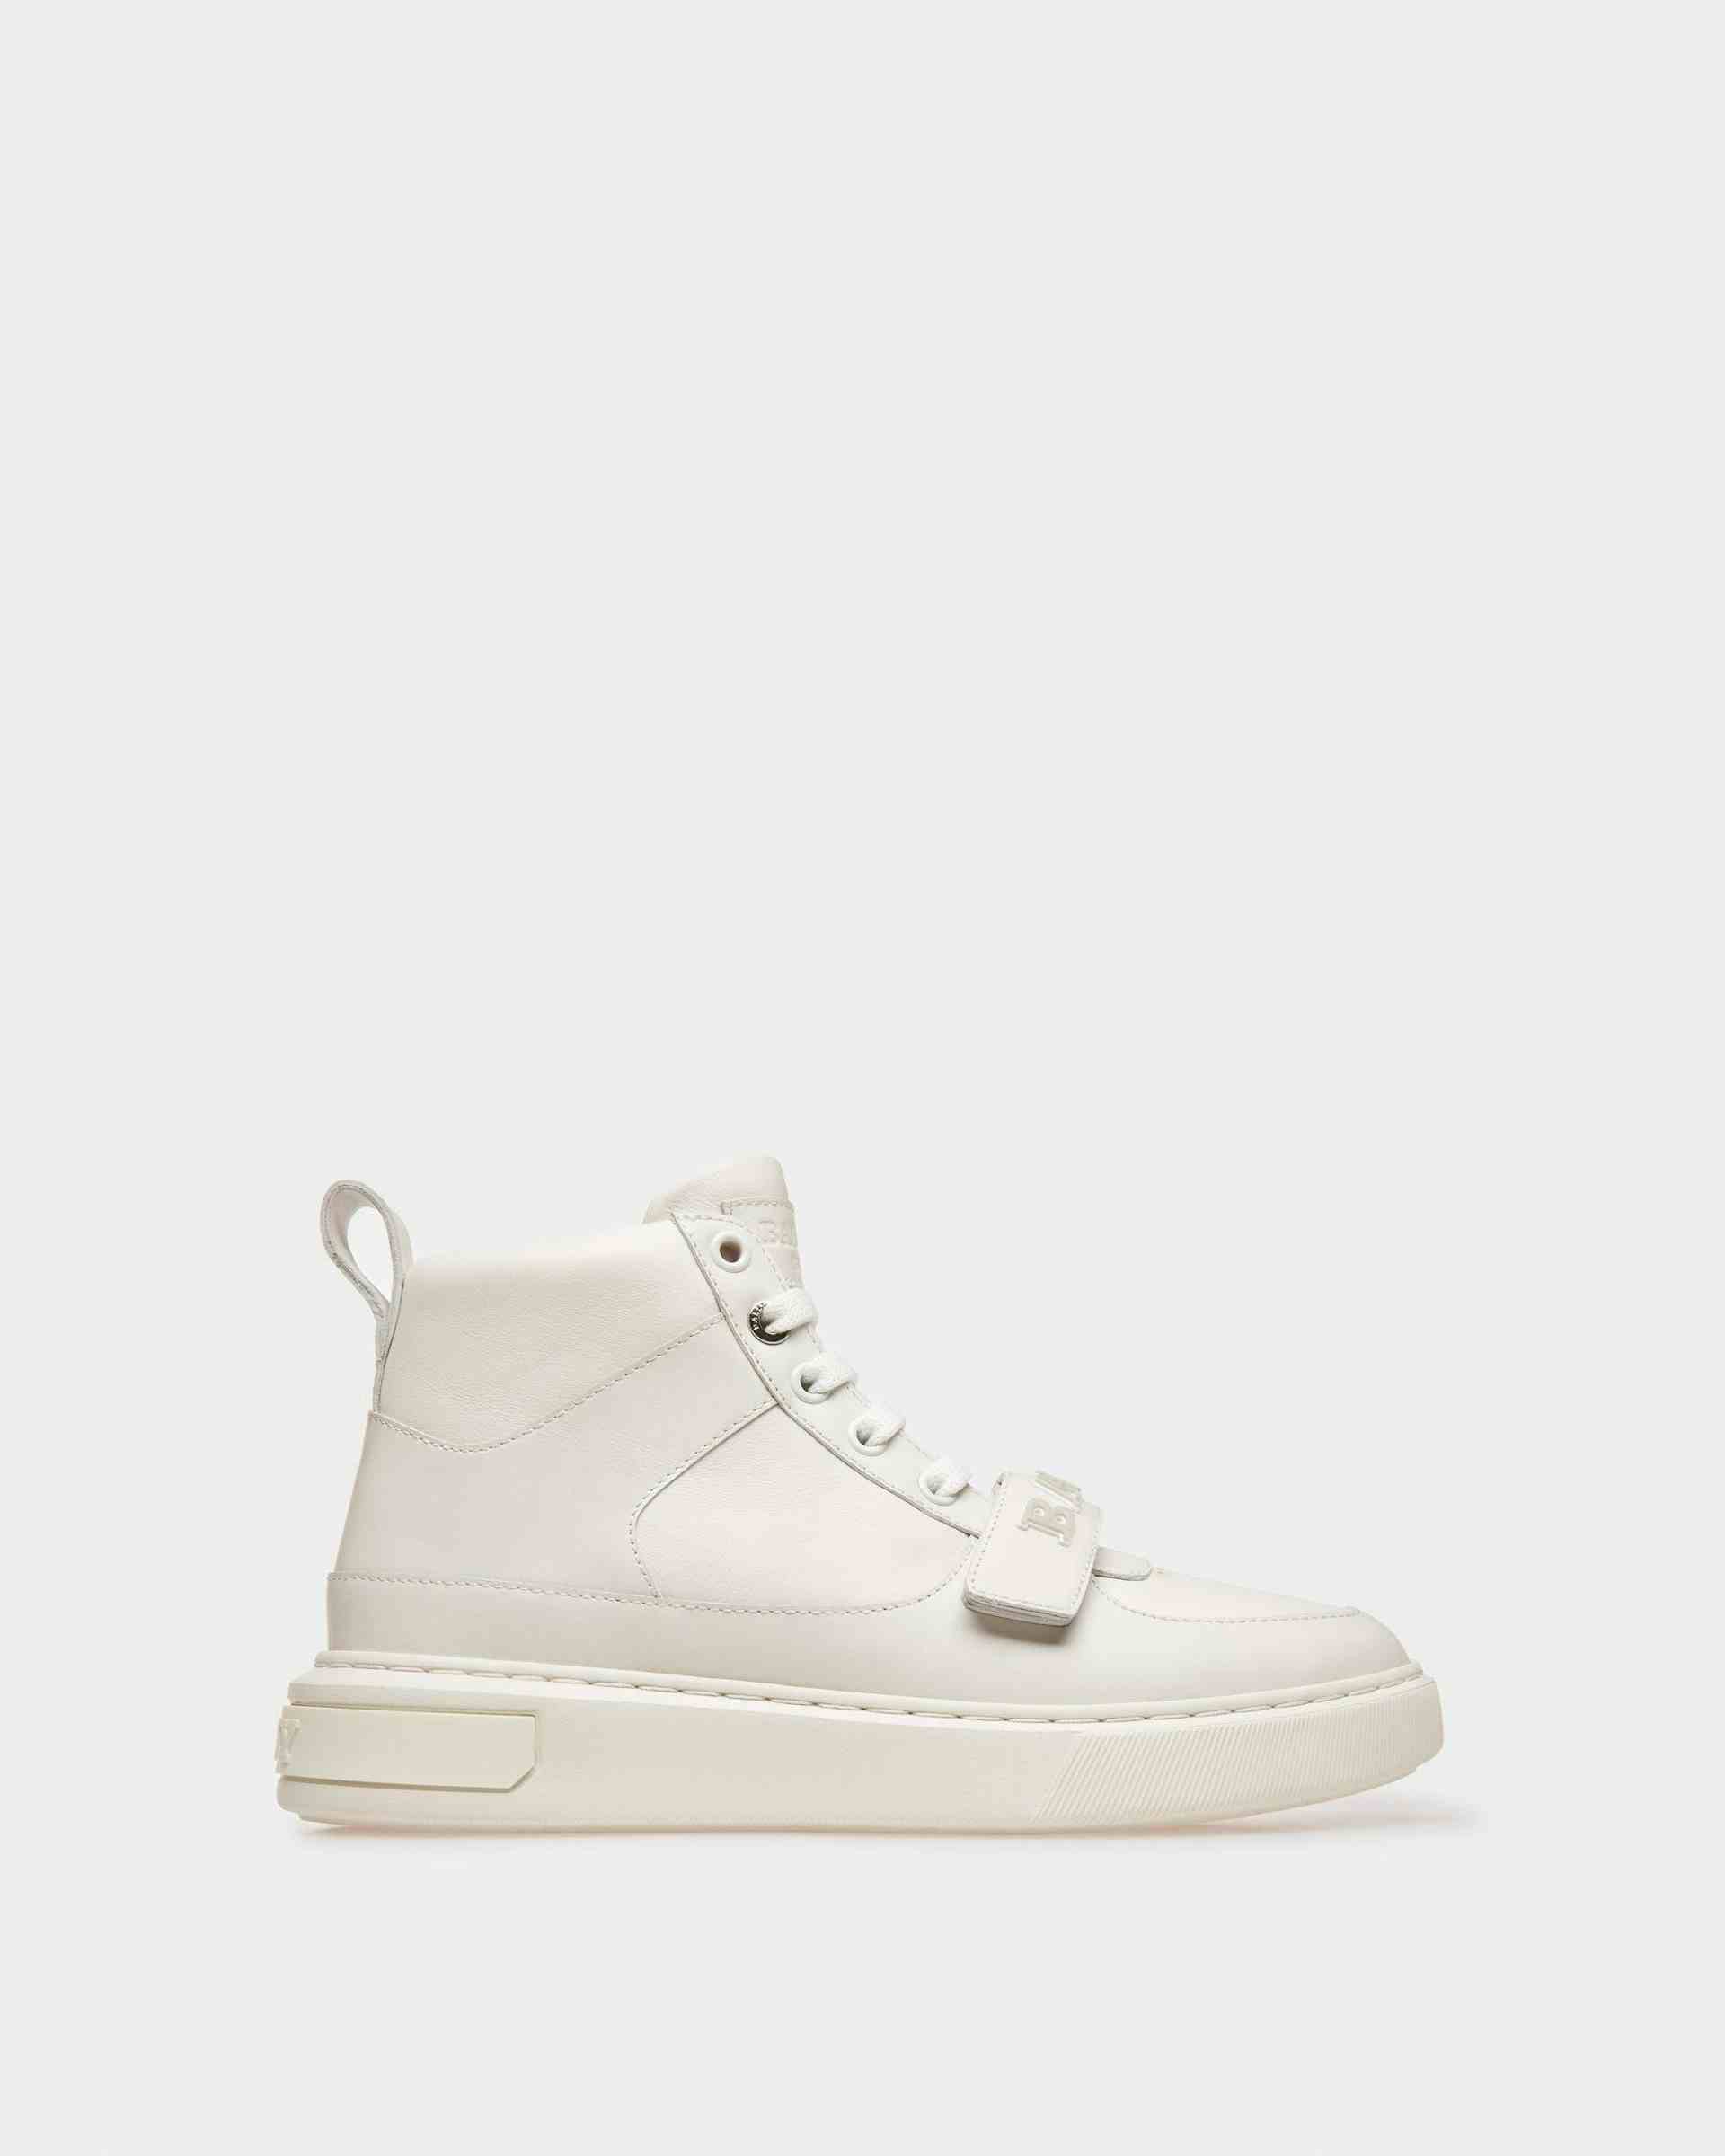 Merryk Leather Sneakers In White - Women's - Bally